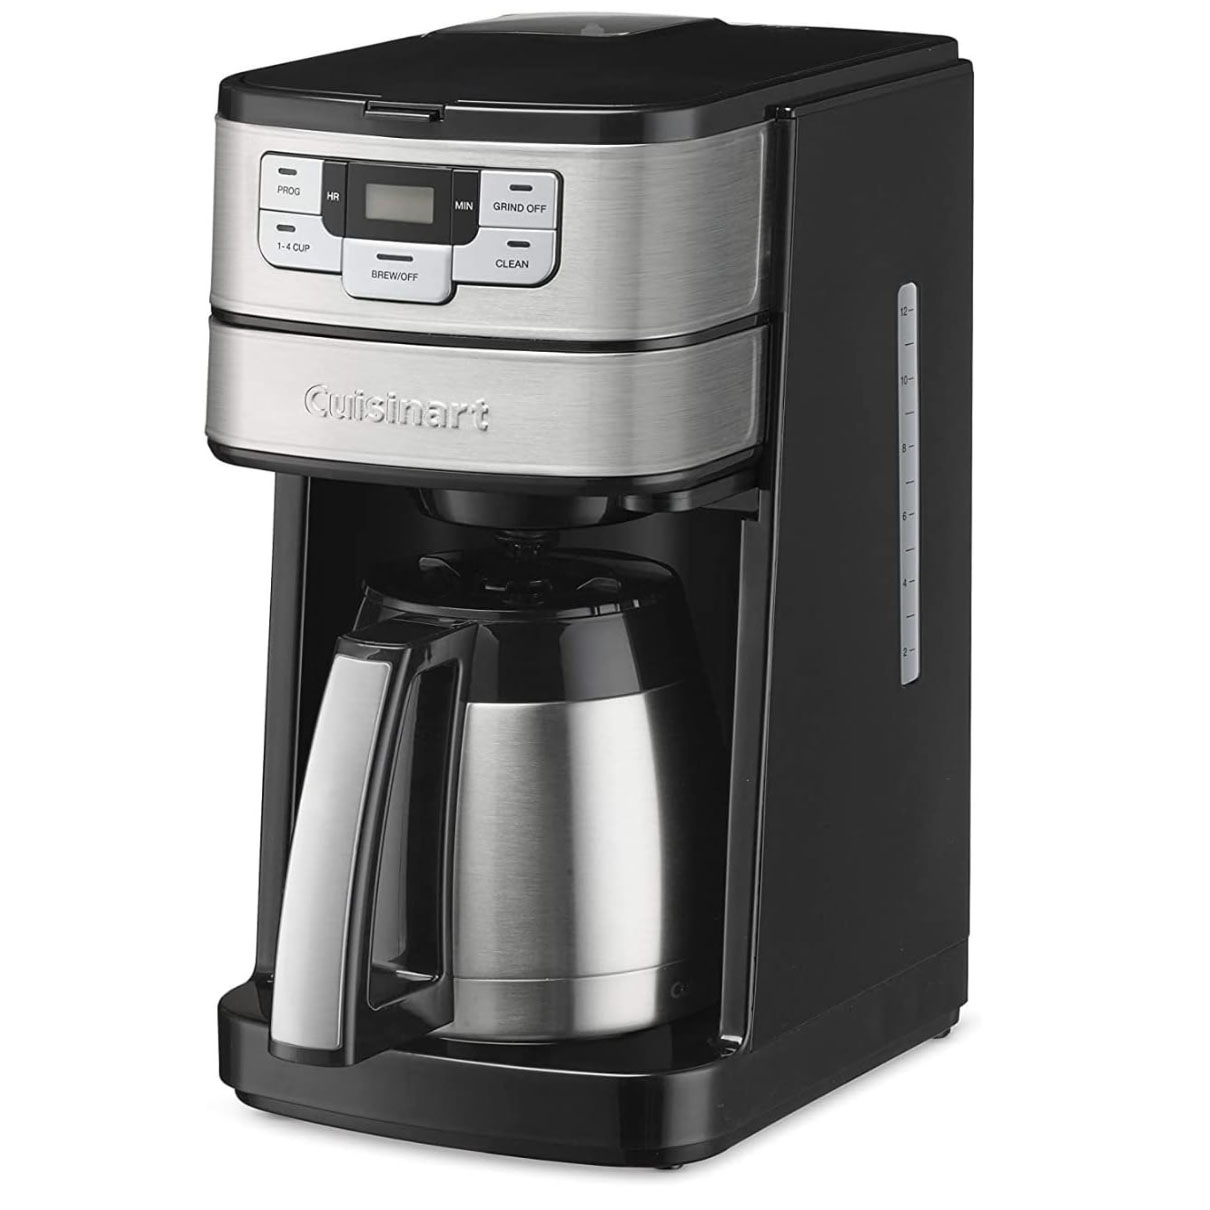 Stainless steel Cuisinart 10 Cup Coffee Maker with Grinder